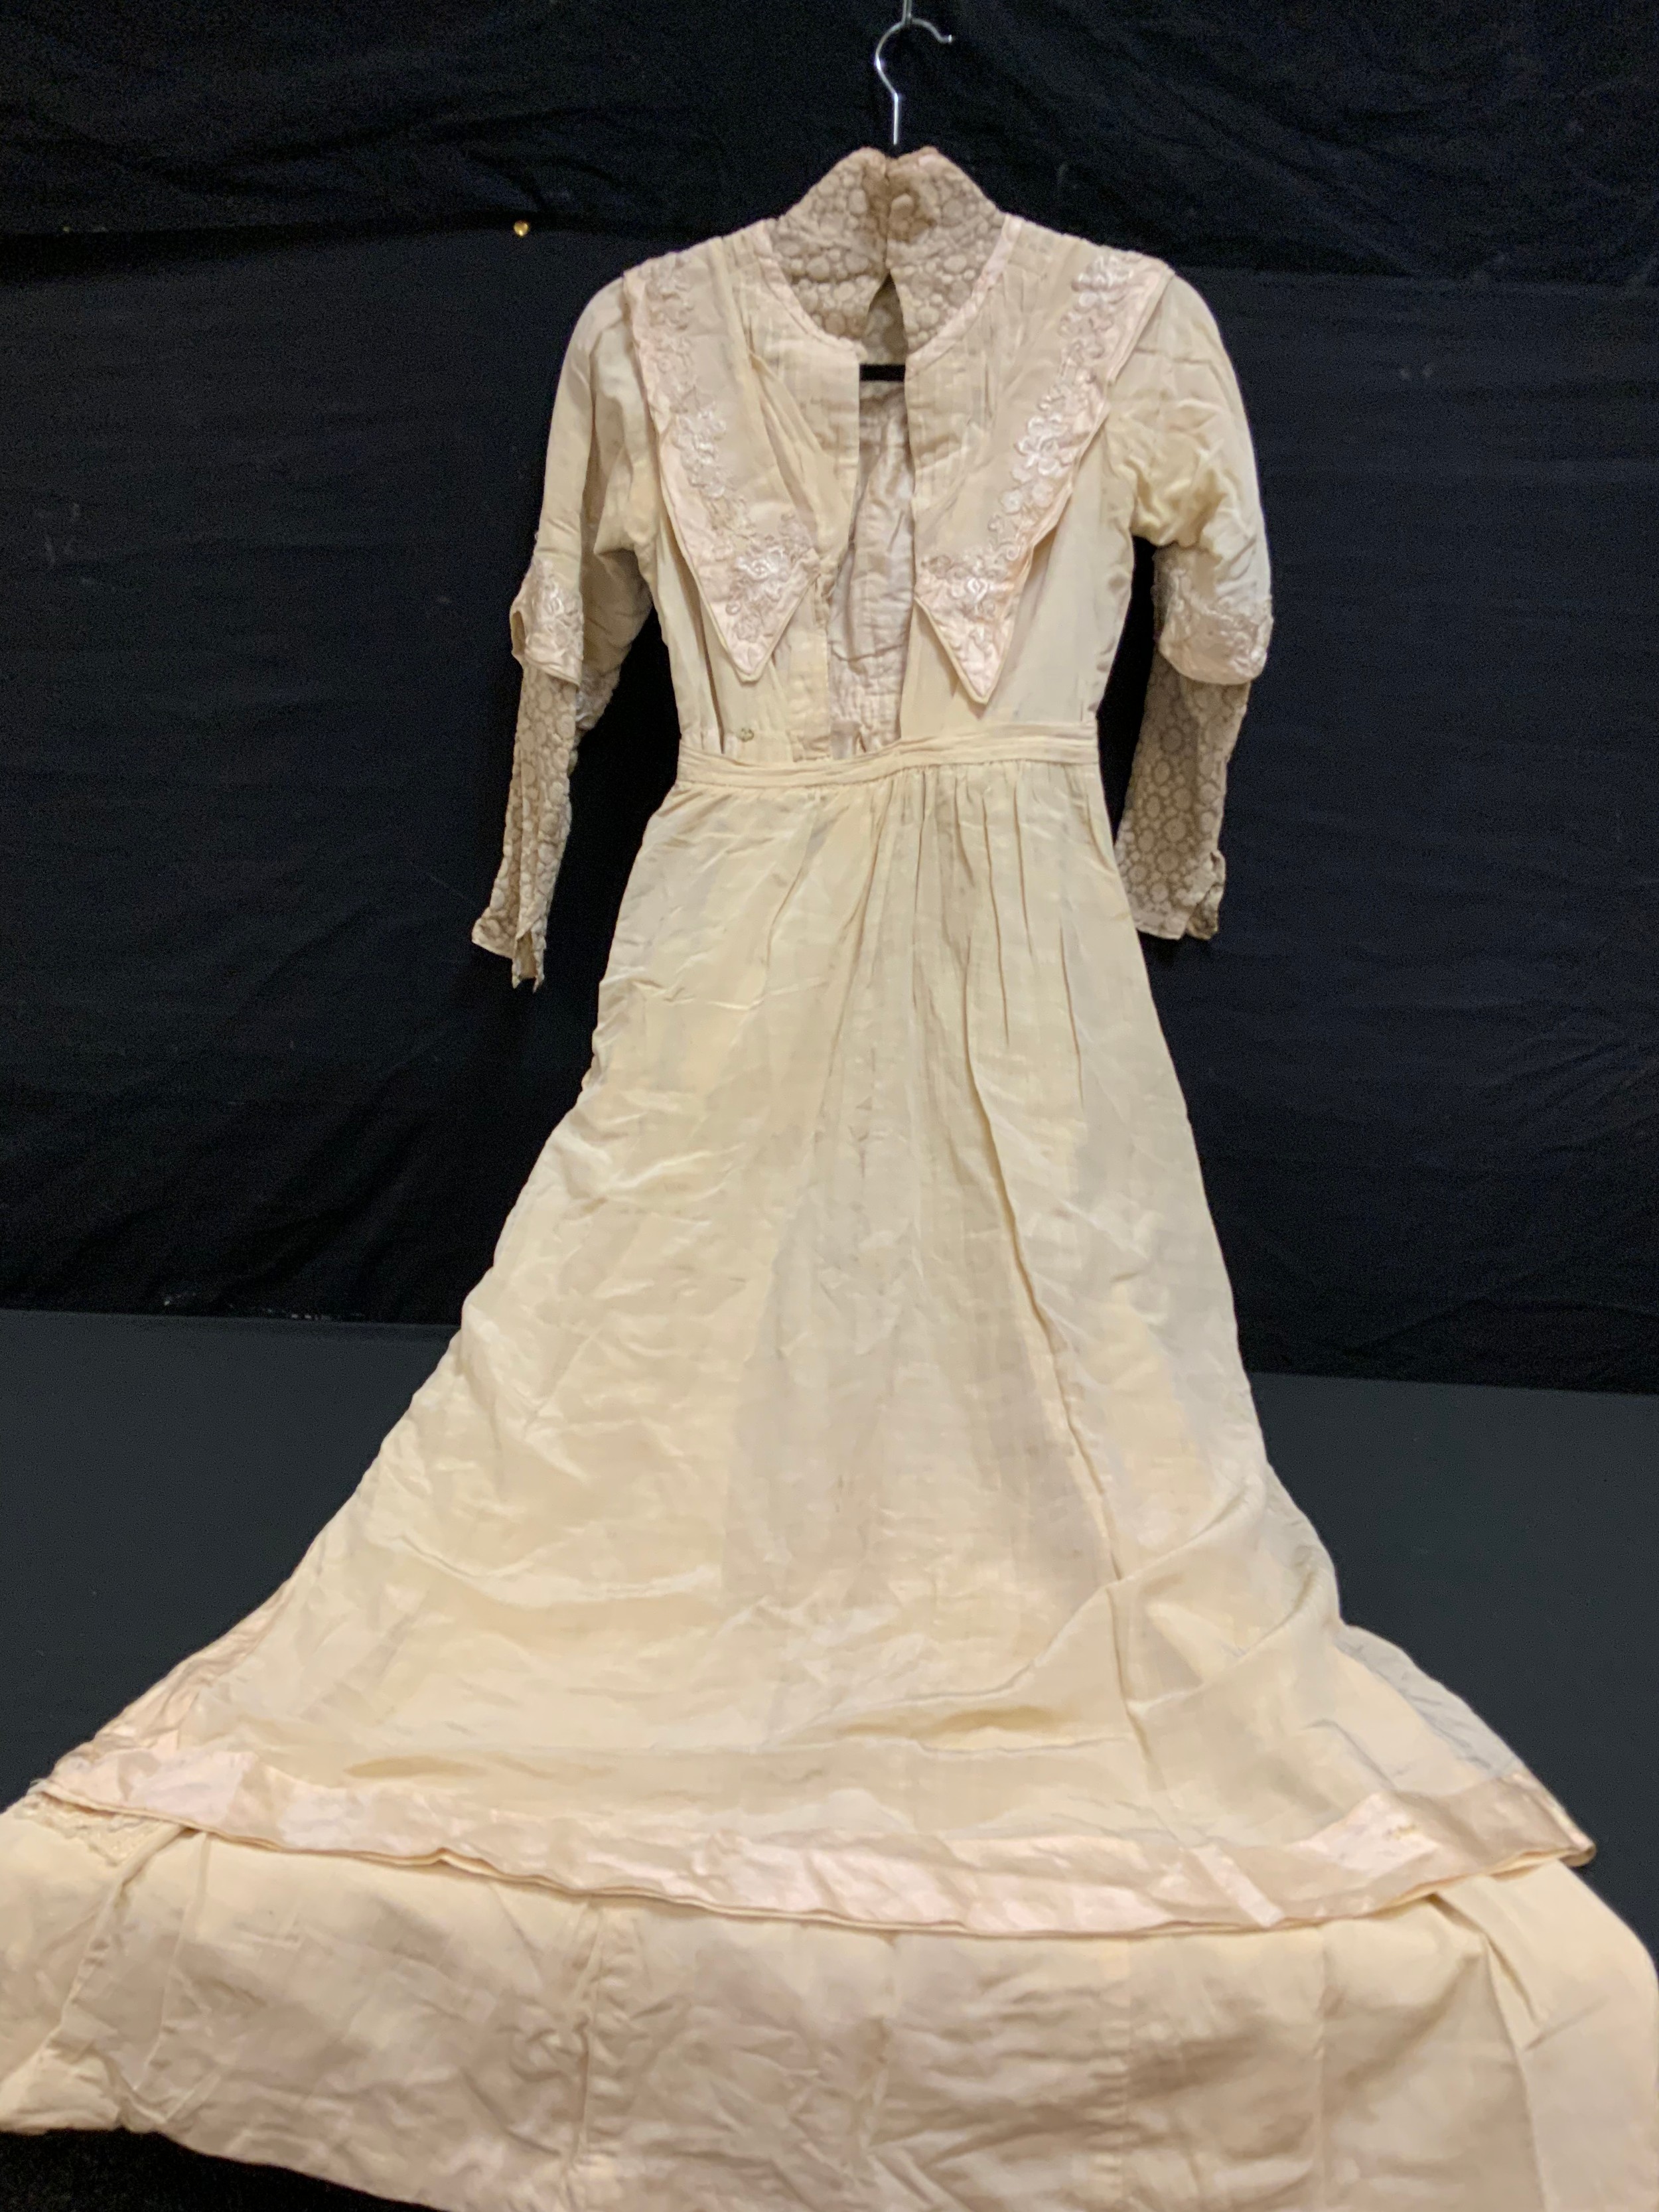 Fashion & Textiles - a Victorian hand made wedding gown, high collared lace neck, embroidered floral - Image 2 of 3